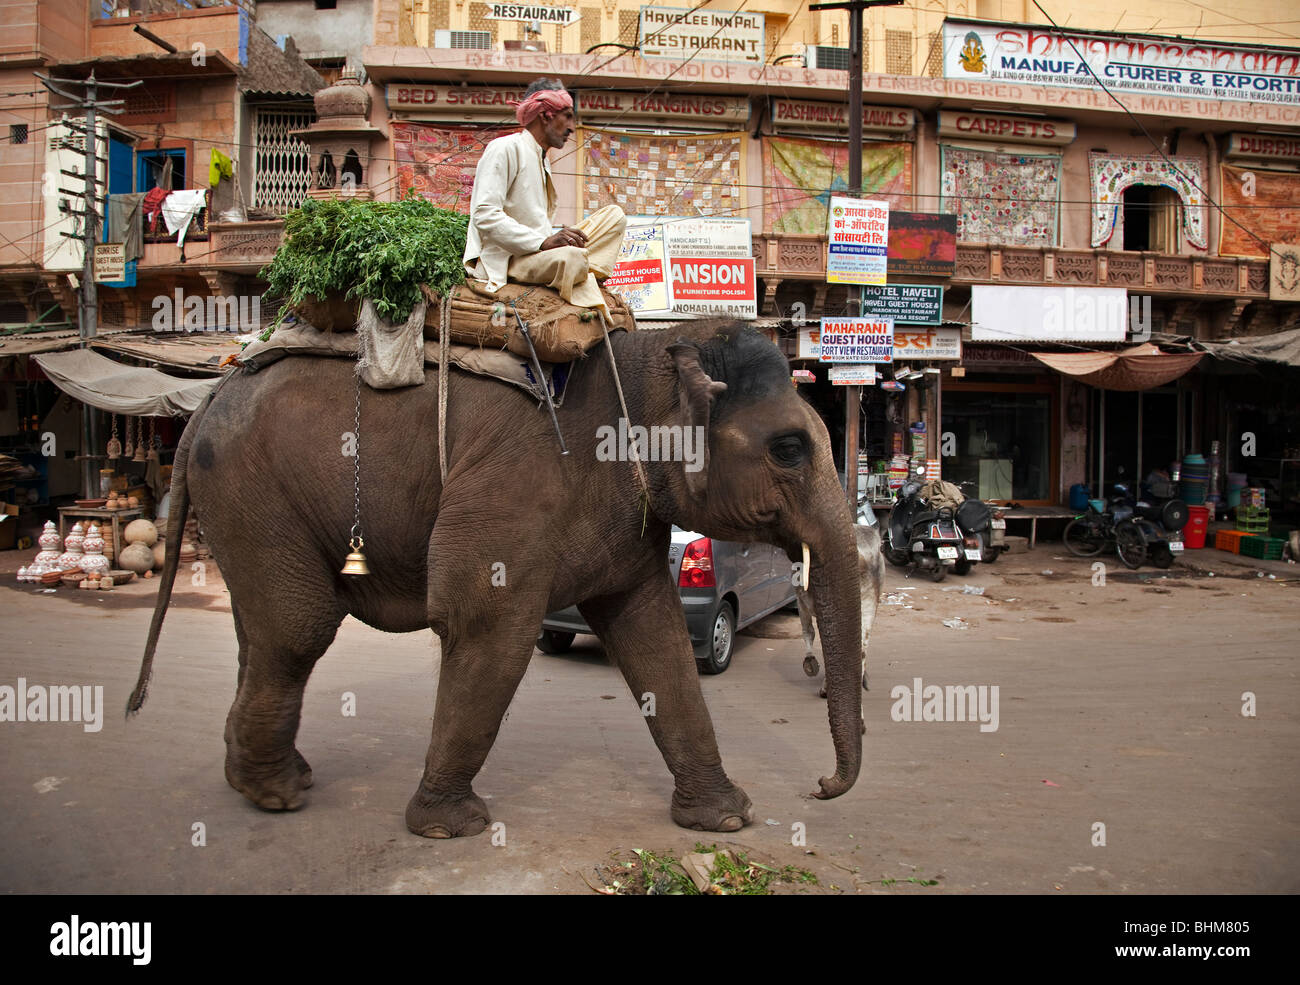 An elephant and its mahout wander the market in the Rajasthani city of Jodhpur India . Stock Photo